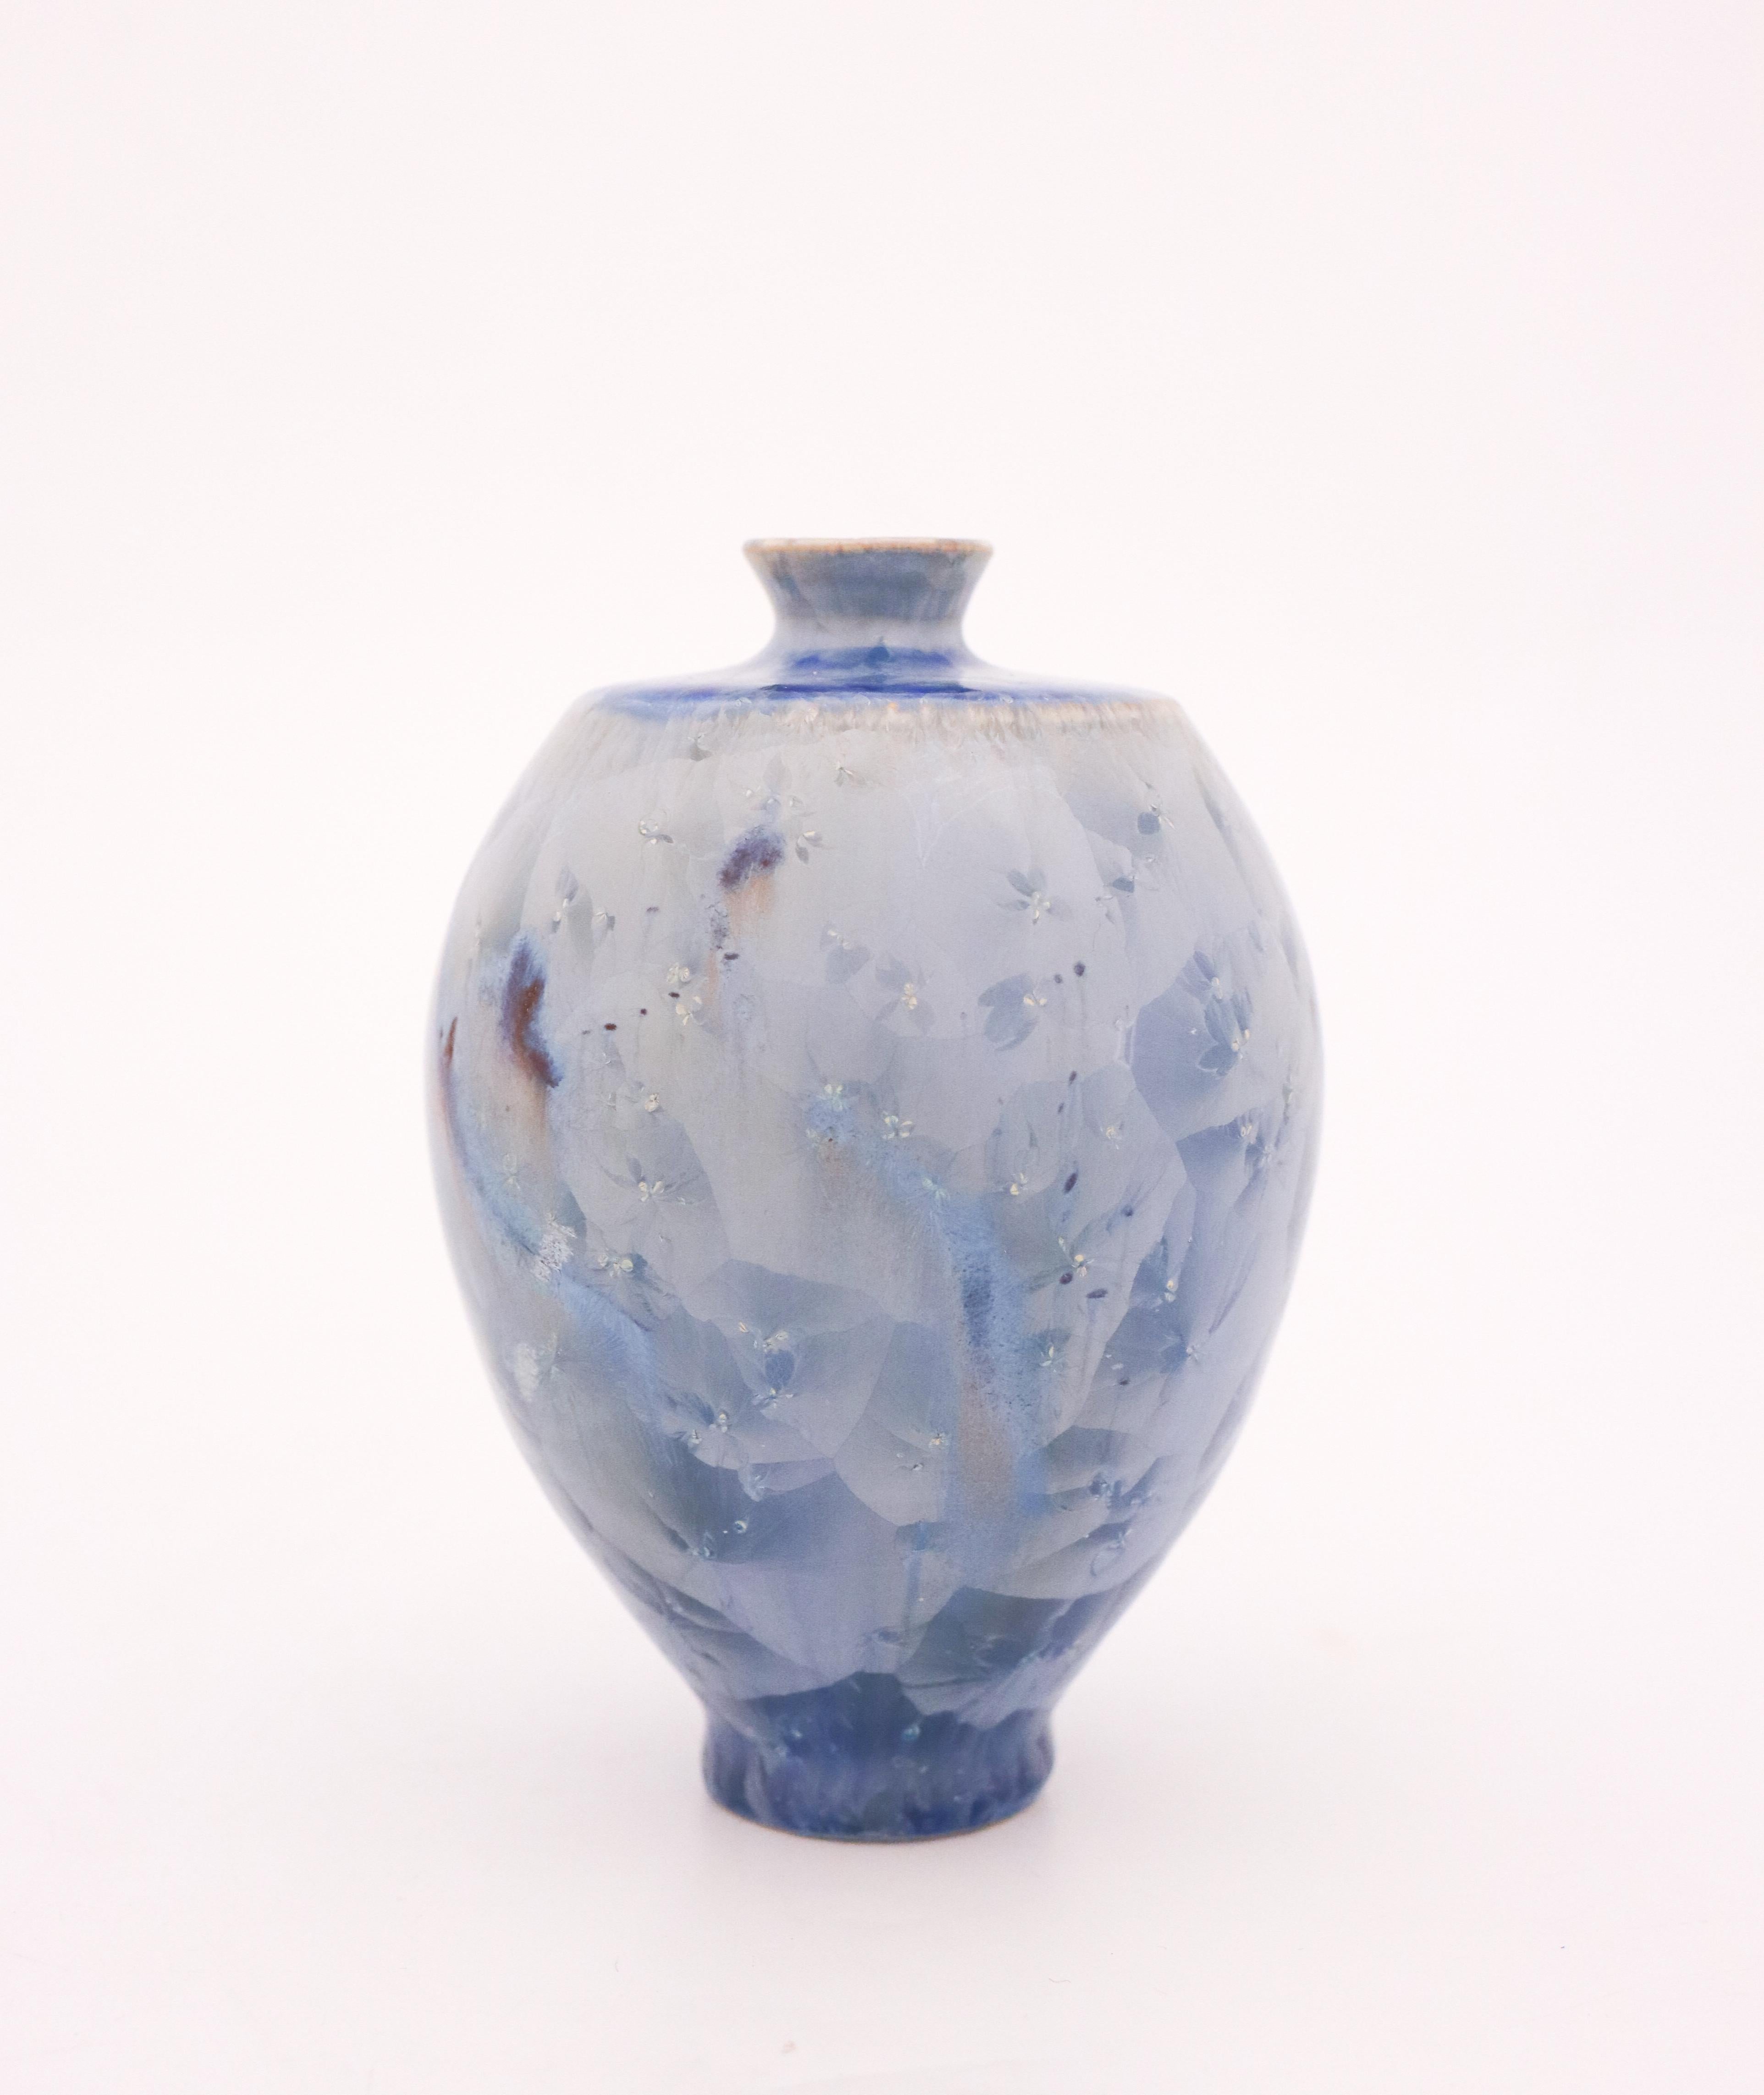 A unique vase with a blue crystalline glaze designed by the contemporary Swedish artist Isak Isaksson in his own studio. The vase is 14 cm (5,6